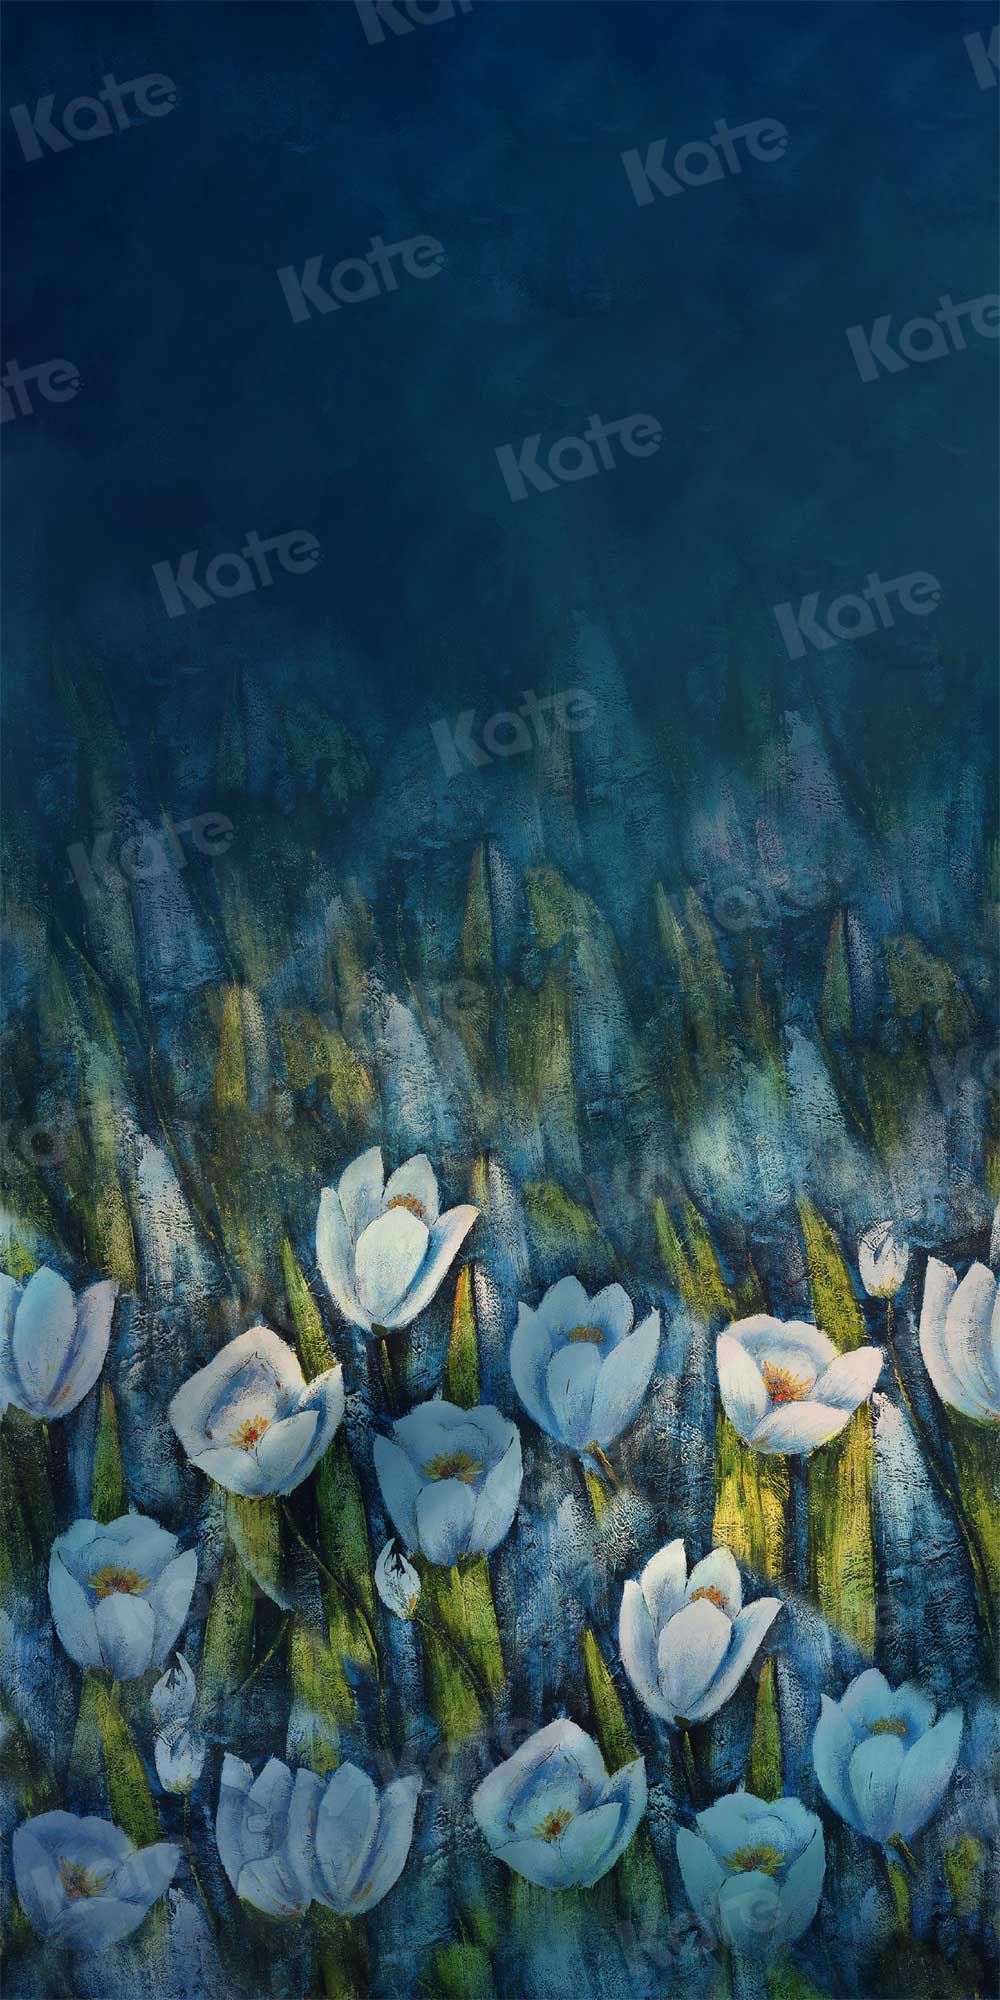 Kate Abstract Flowers Backdrop Blue for Photography